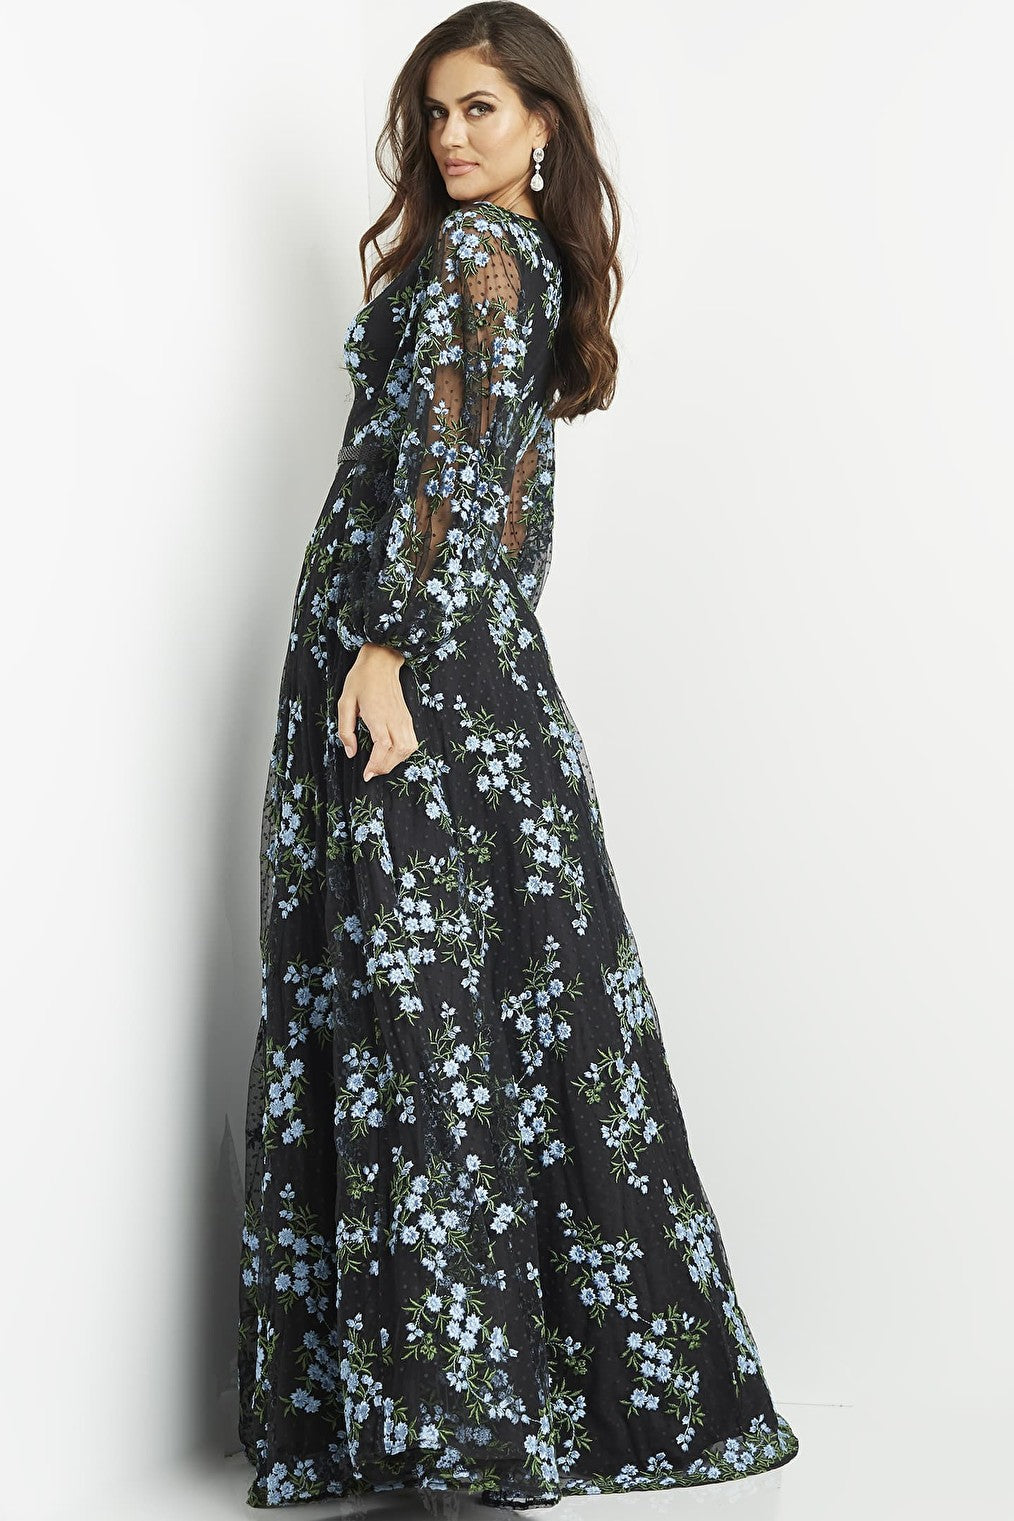 mother of the bride floral dress 09446 